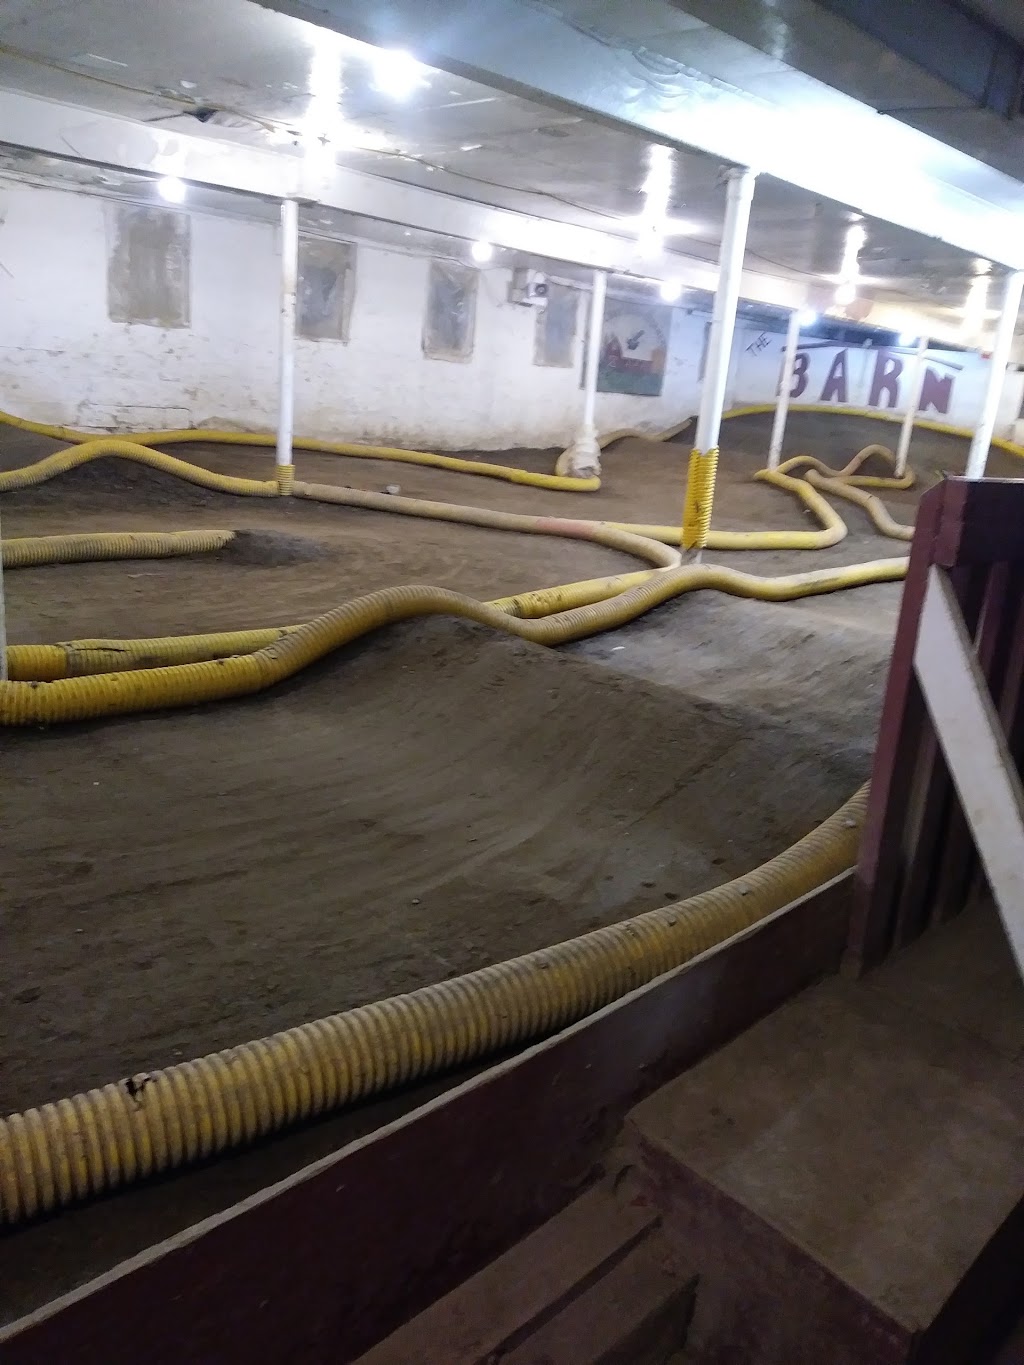 Barnstormers Off-Road RC Raceways | 205 Greycourt Rd, Chester, NY 10918 | Phone: (845) 469-2276